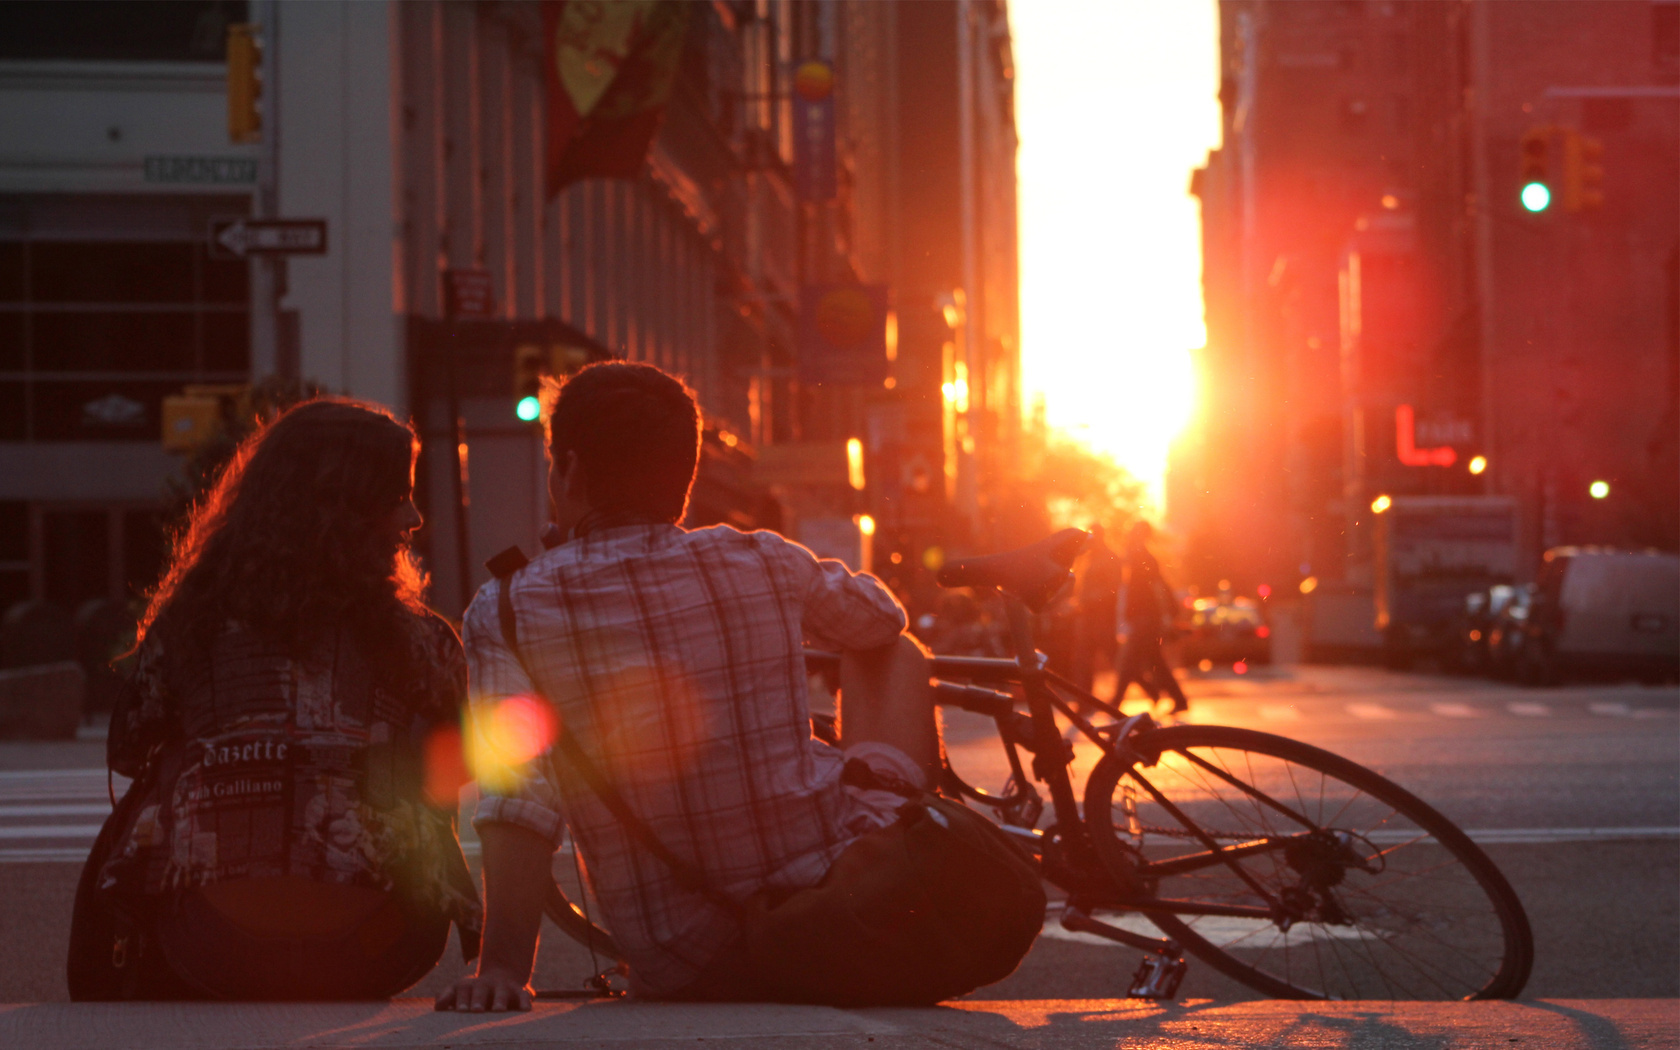 couple-romantic-evening-love-sunset-bicycle-other